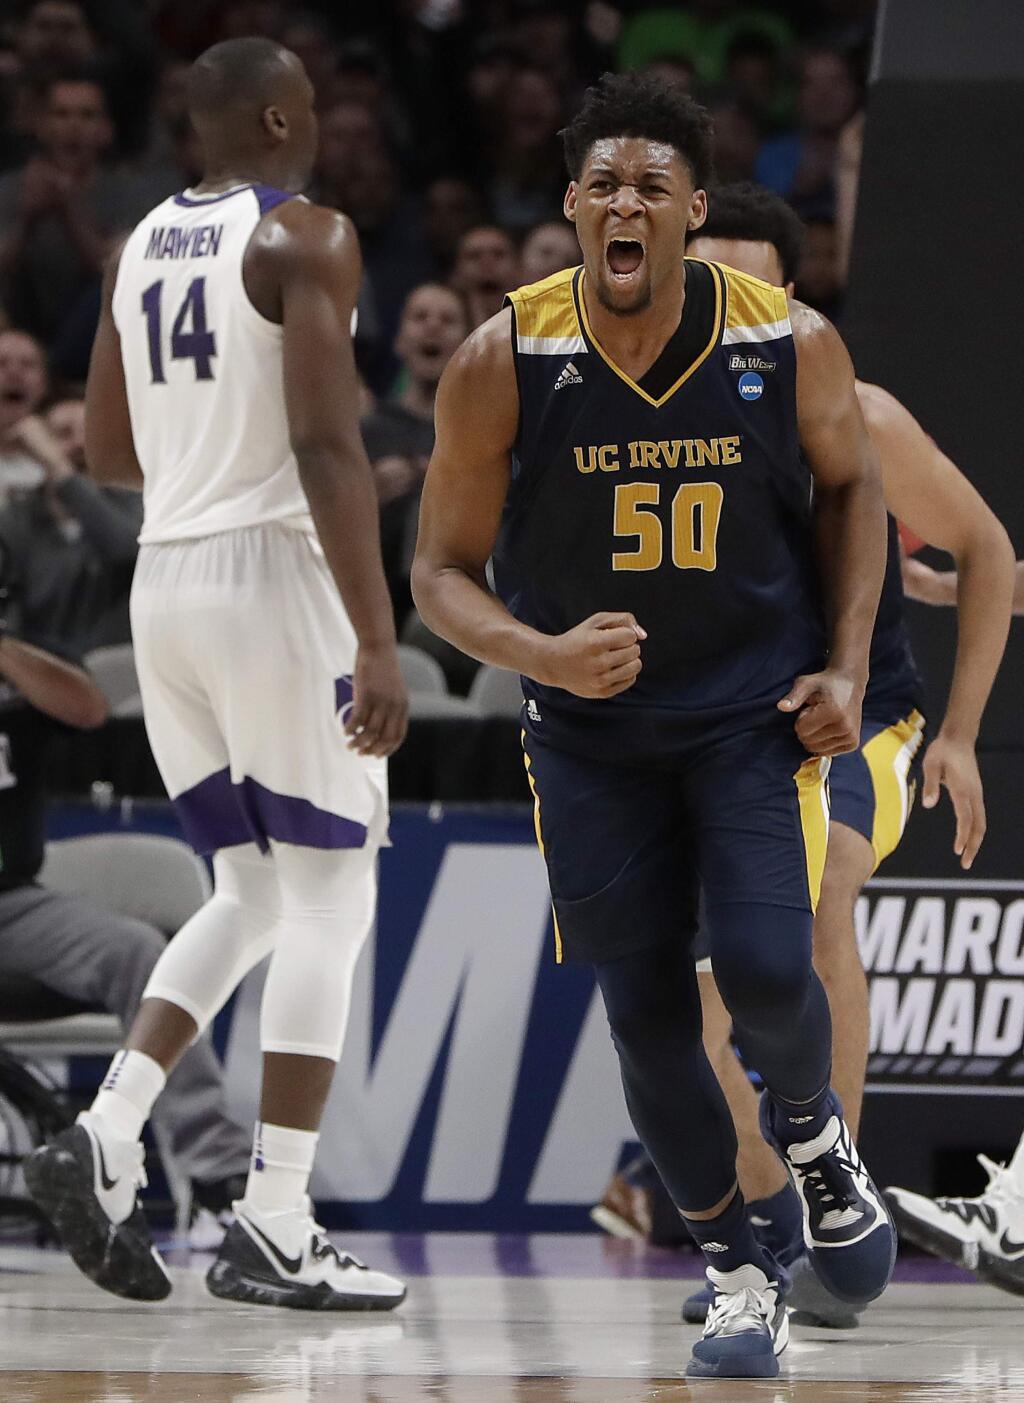 UC Irvine forward Elston Jones, right, reacts after scoring against Kansas State during the first half of a first-round game in the NCAA Tournament Friday, March 22, 2019, in San Jose. (AP Photo/Chris Carlson)